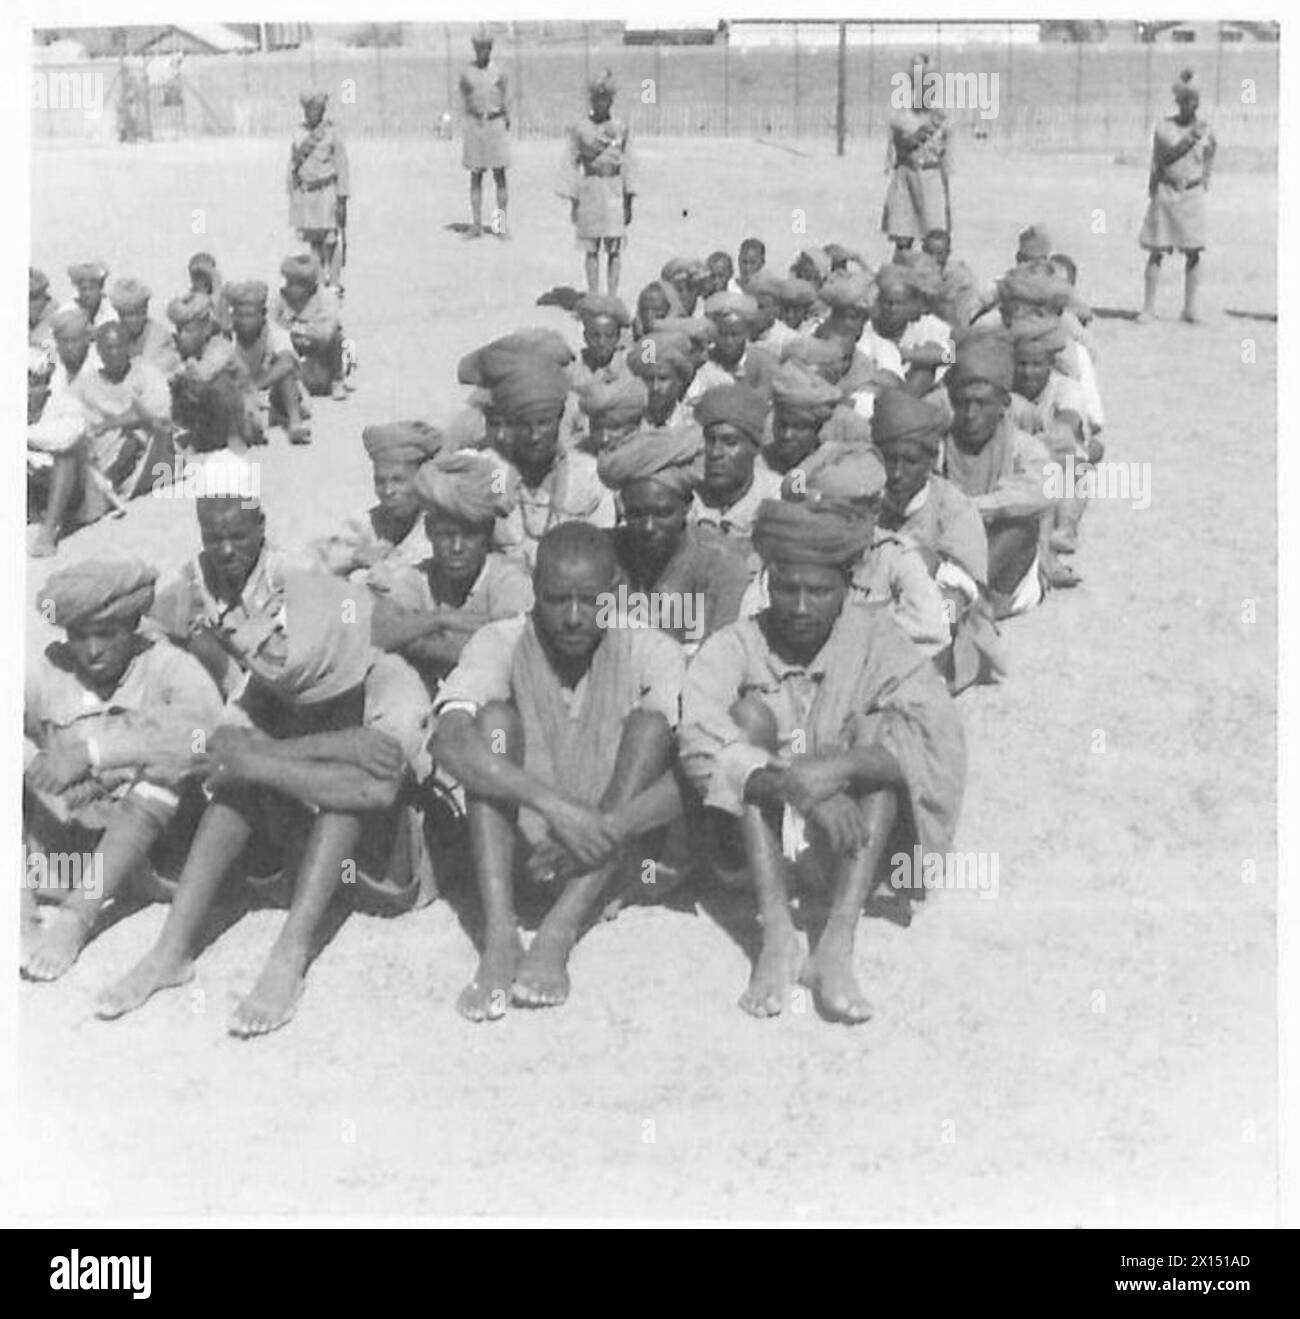 ETHIOPIAN WARRIORS AID BRITISH TROOPS - Fascist native auxiliaries captured by British patrols during our regular forays into Abyssinia. Altogether 300 of them, including Eritrean, Gallas and Abyssinian conscripts have been rounded up during our recent actions inside enemy territory. The prisoners shown in the pictures were captured on the Aroma and Kassala fronts British Army Stock Photo